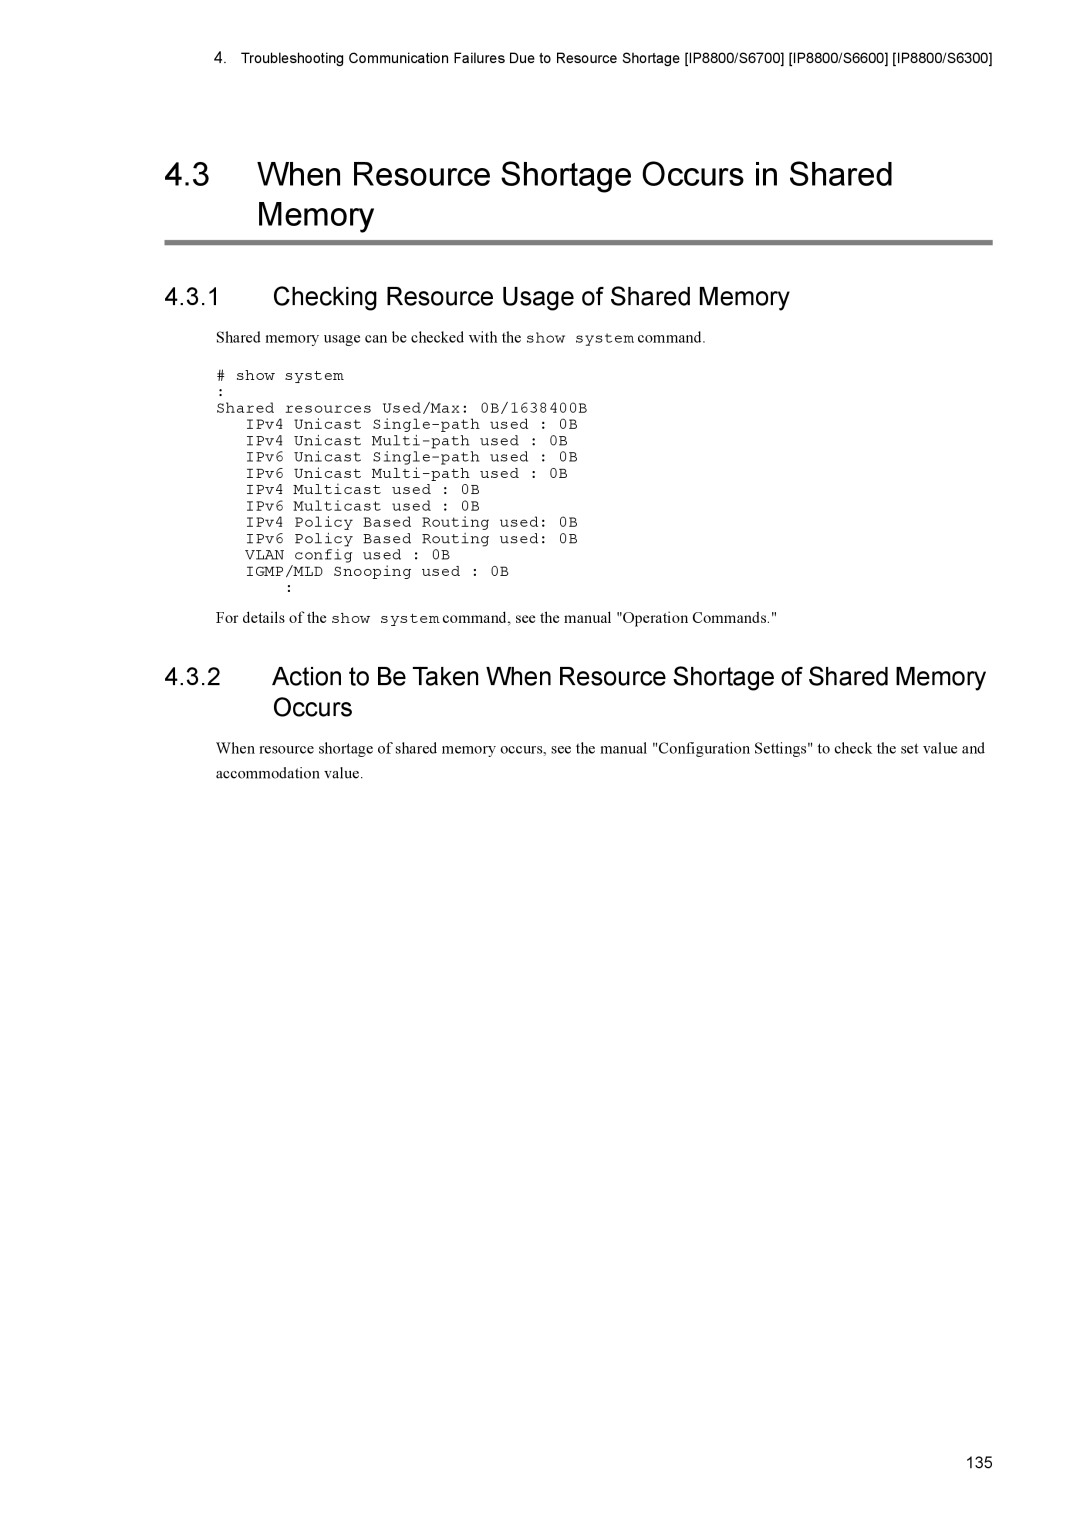 NEC IP8800/S2400, IP8800/S6600 When Resource Shortage Occurs in Shared Memory, Checking Resource Usage of Shared Memory 